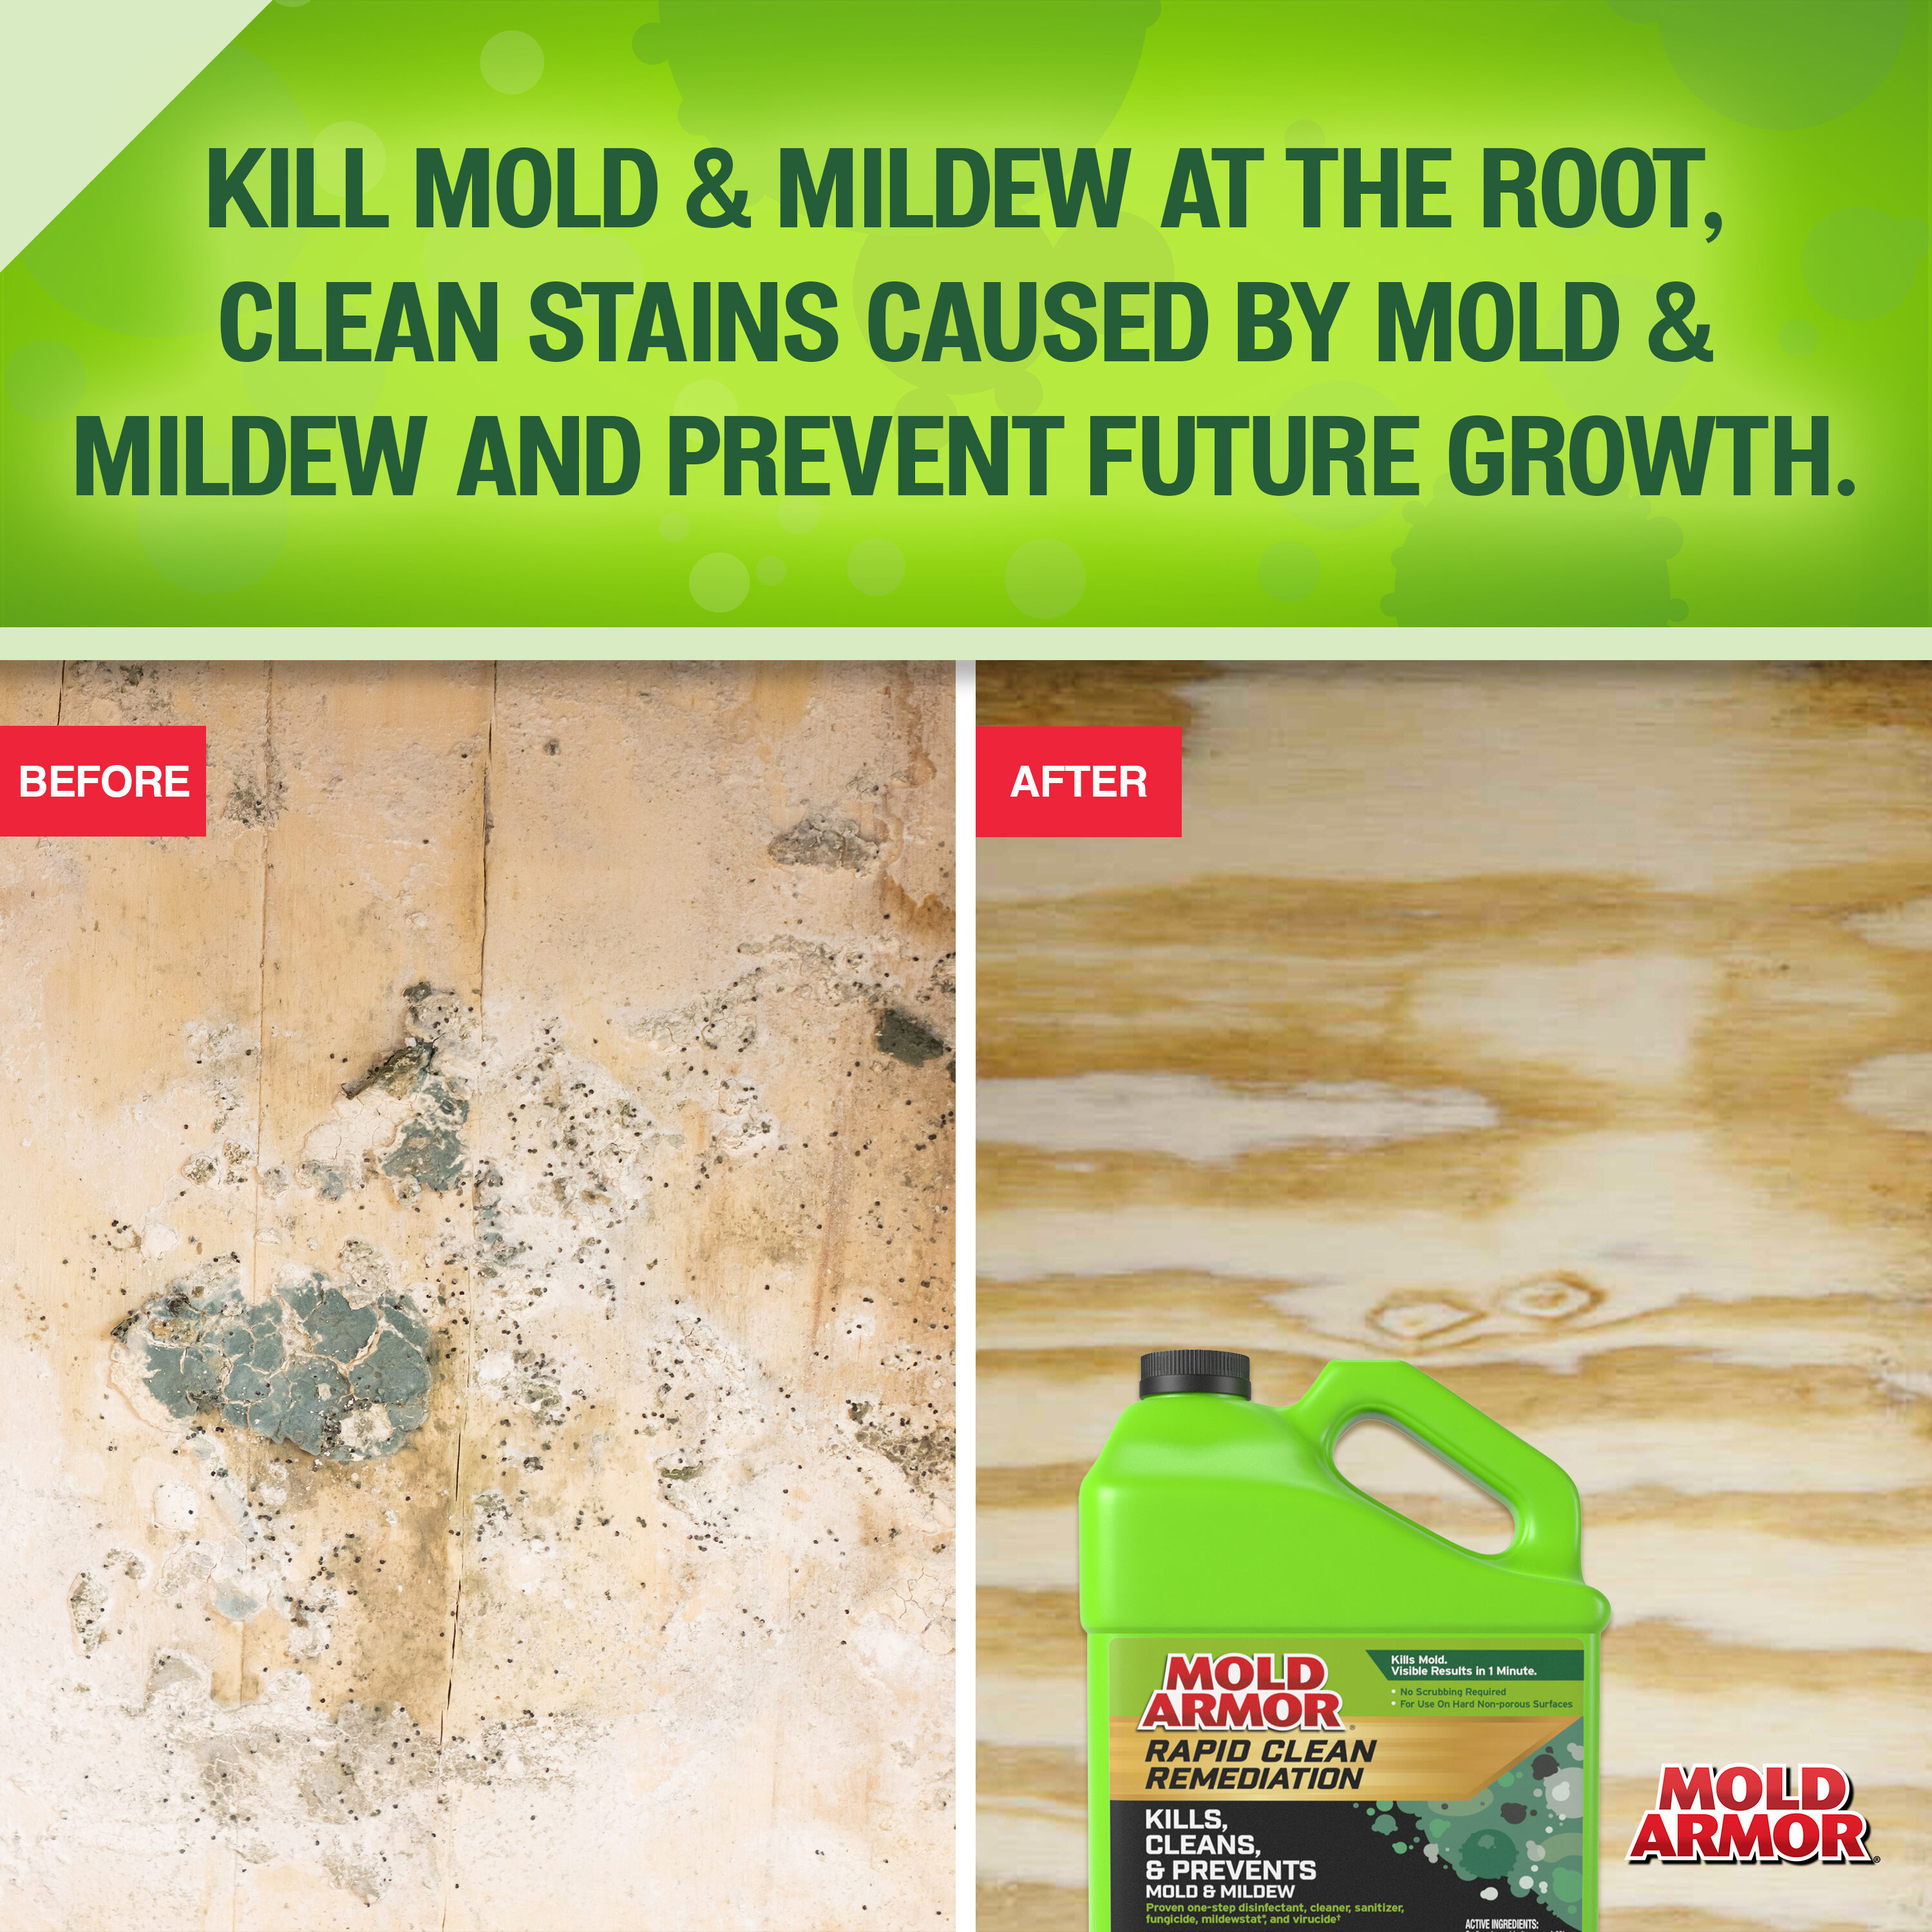 Reviews for Mold Armor Do It Yourself Mold Test Kit, DIY At Home